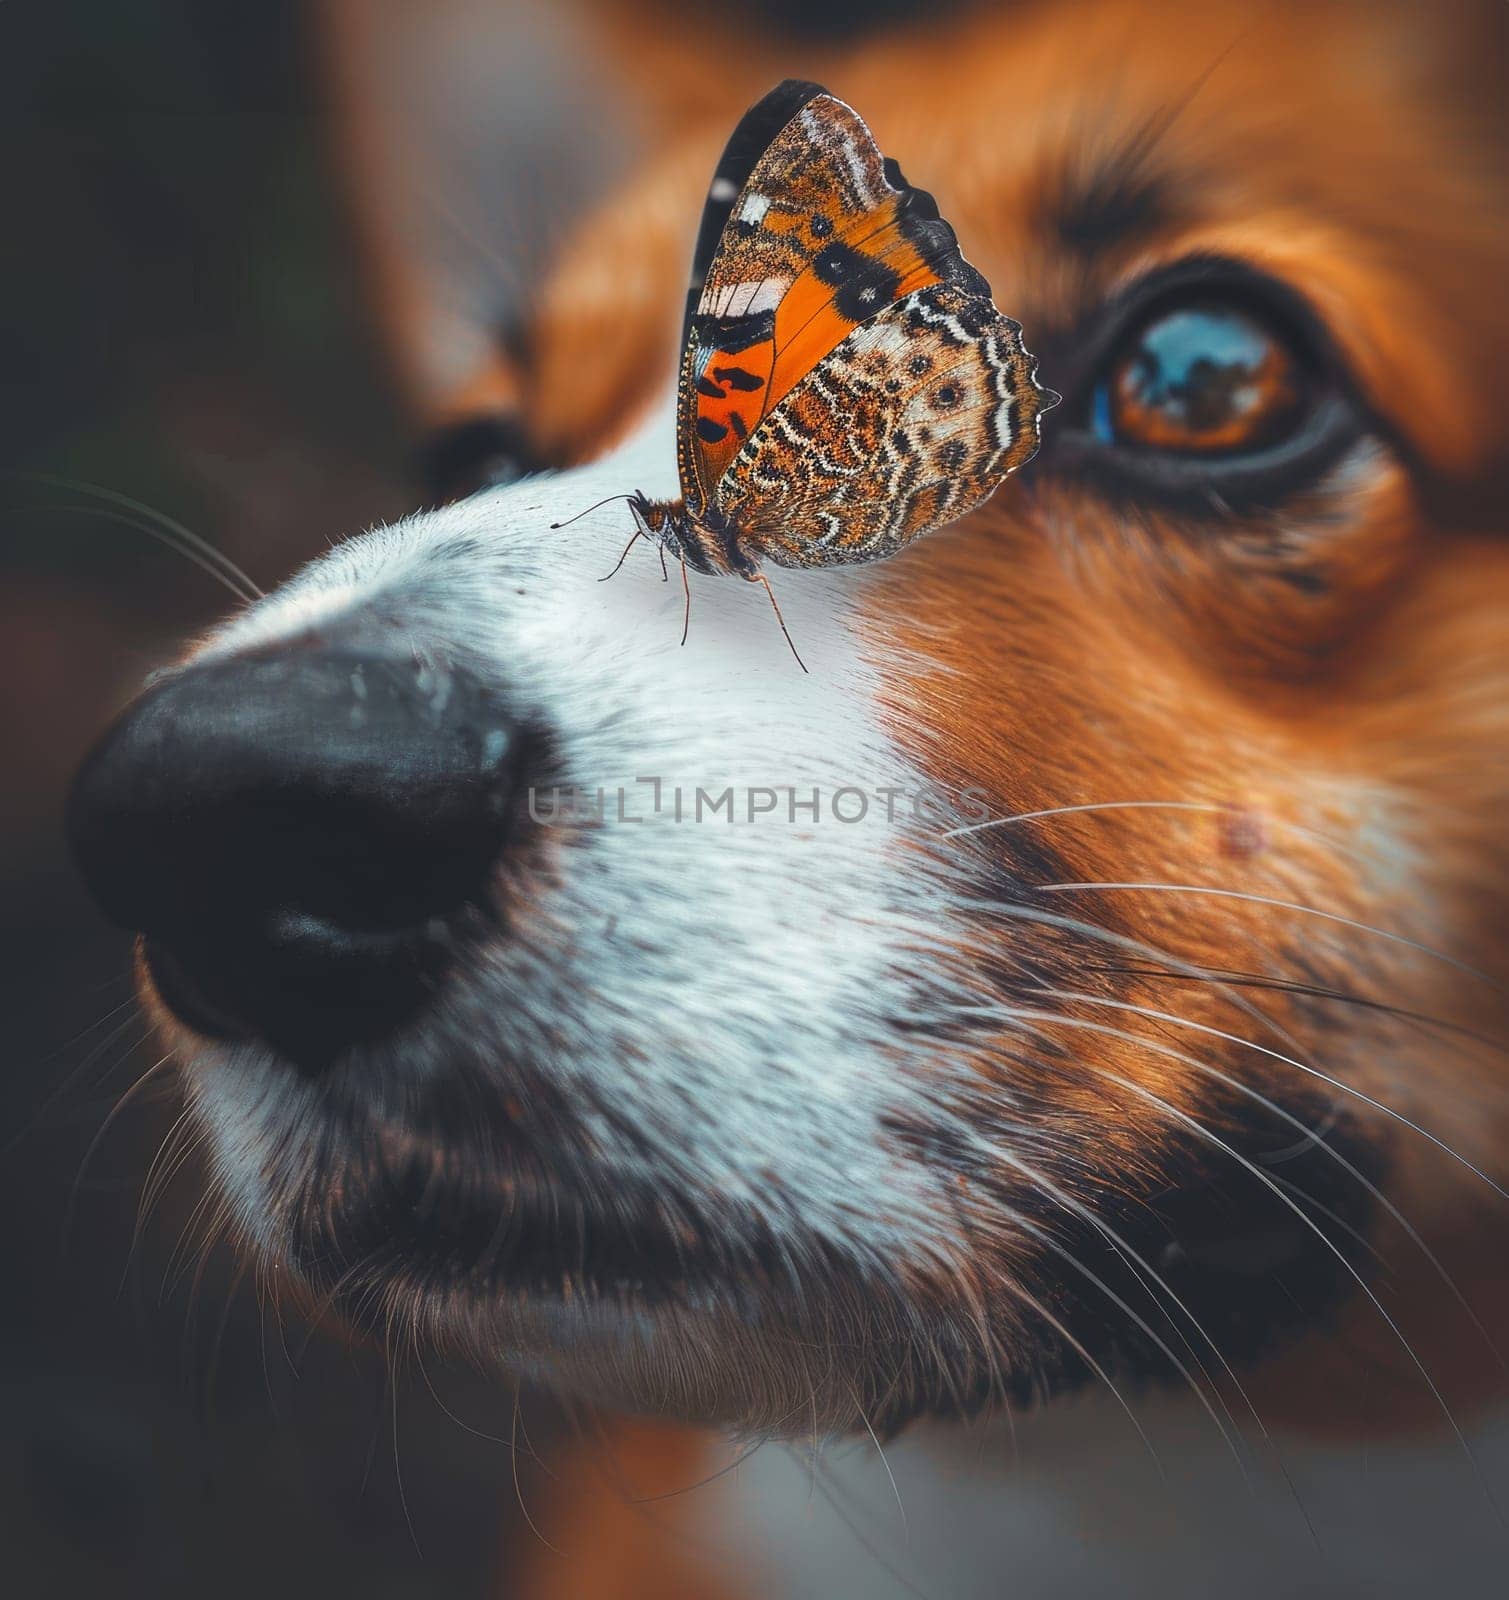 A butterfly with wings like stained glass perches on a corgi dog's nose, a soft blur of fur and eyes in the background. This moment captures a poetic and delicate interaction.